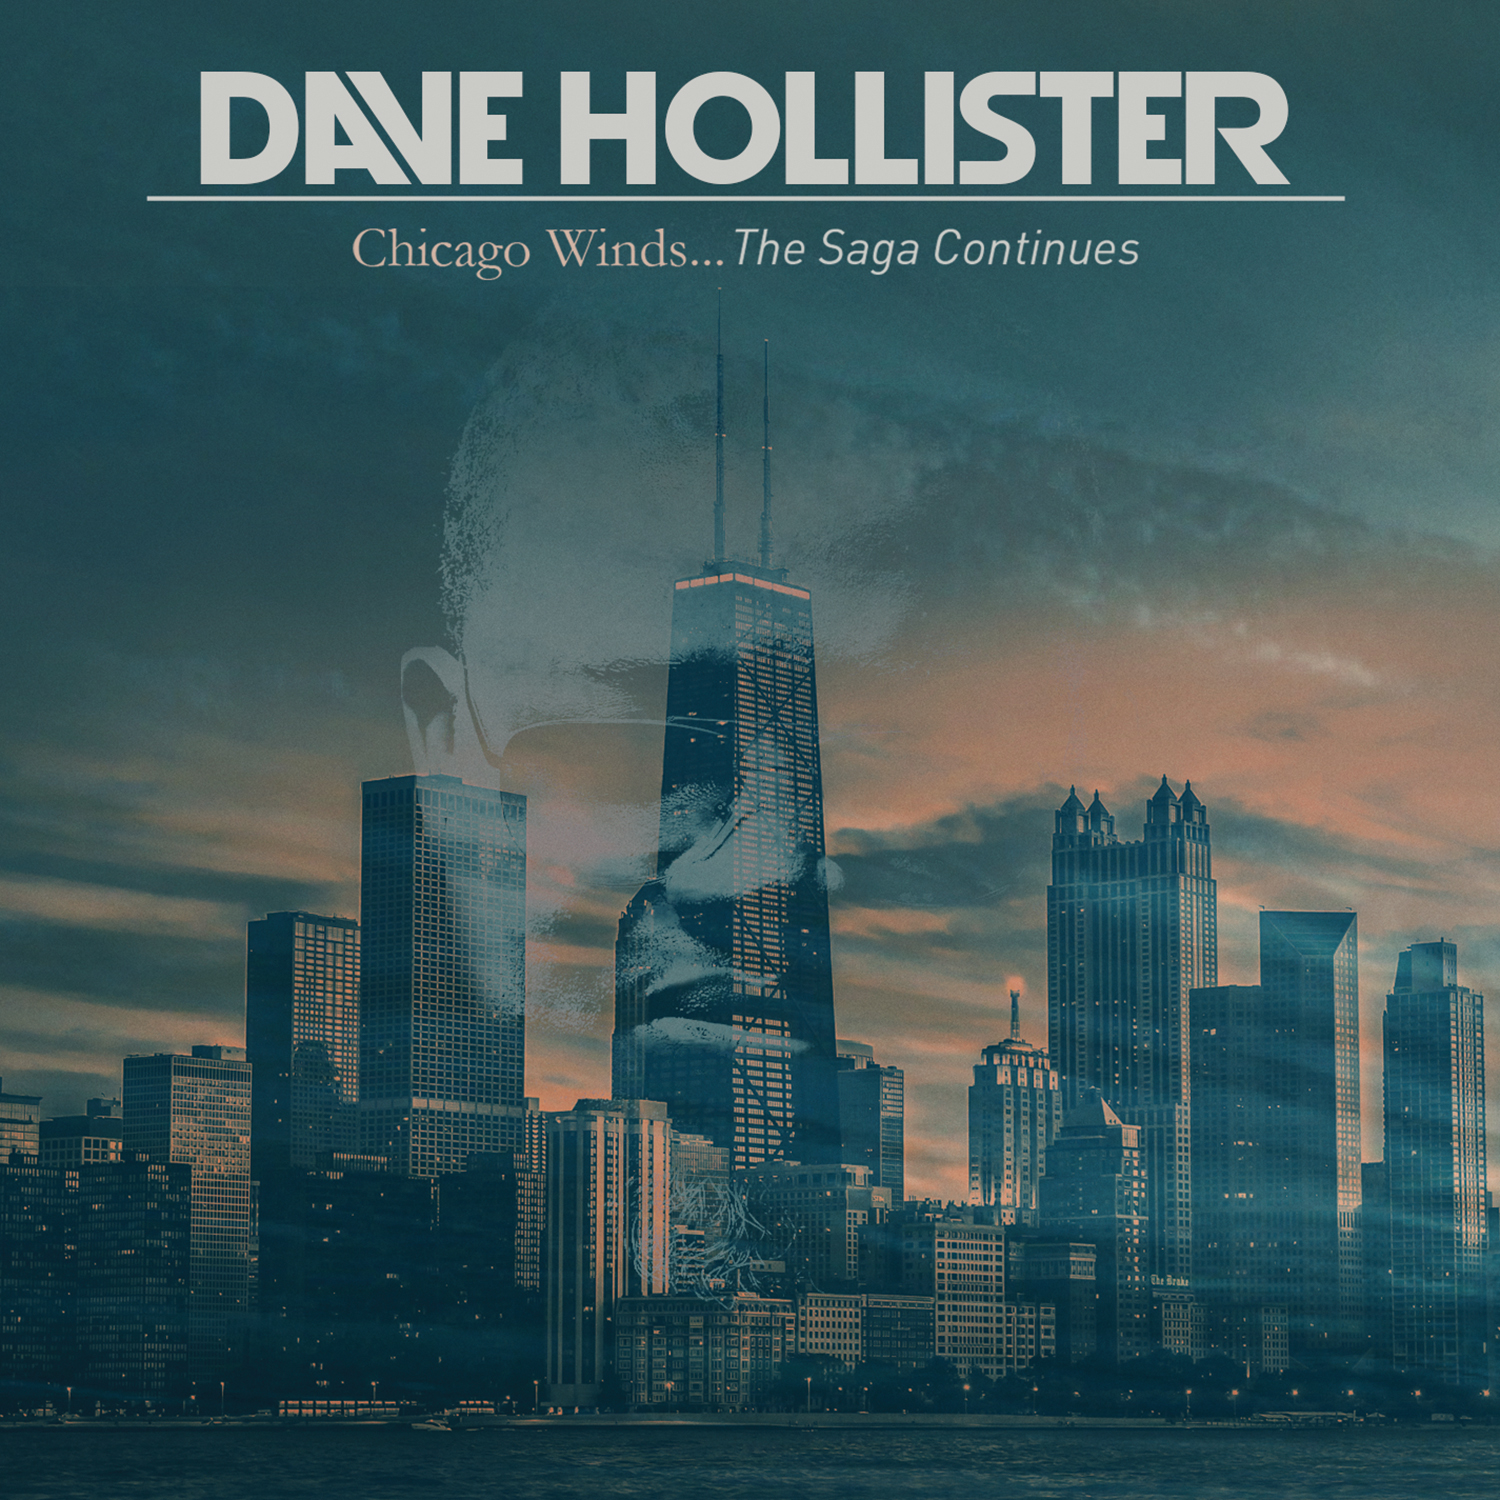 dave-hollister-chicago-winds-the-saga-continues